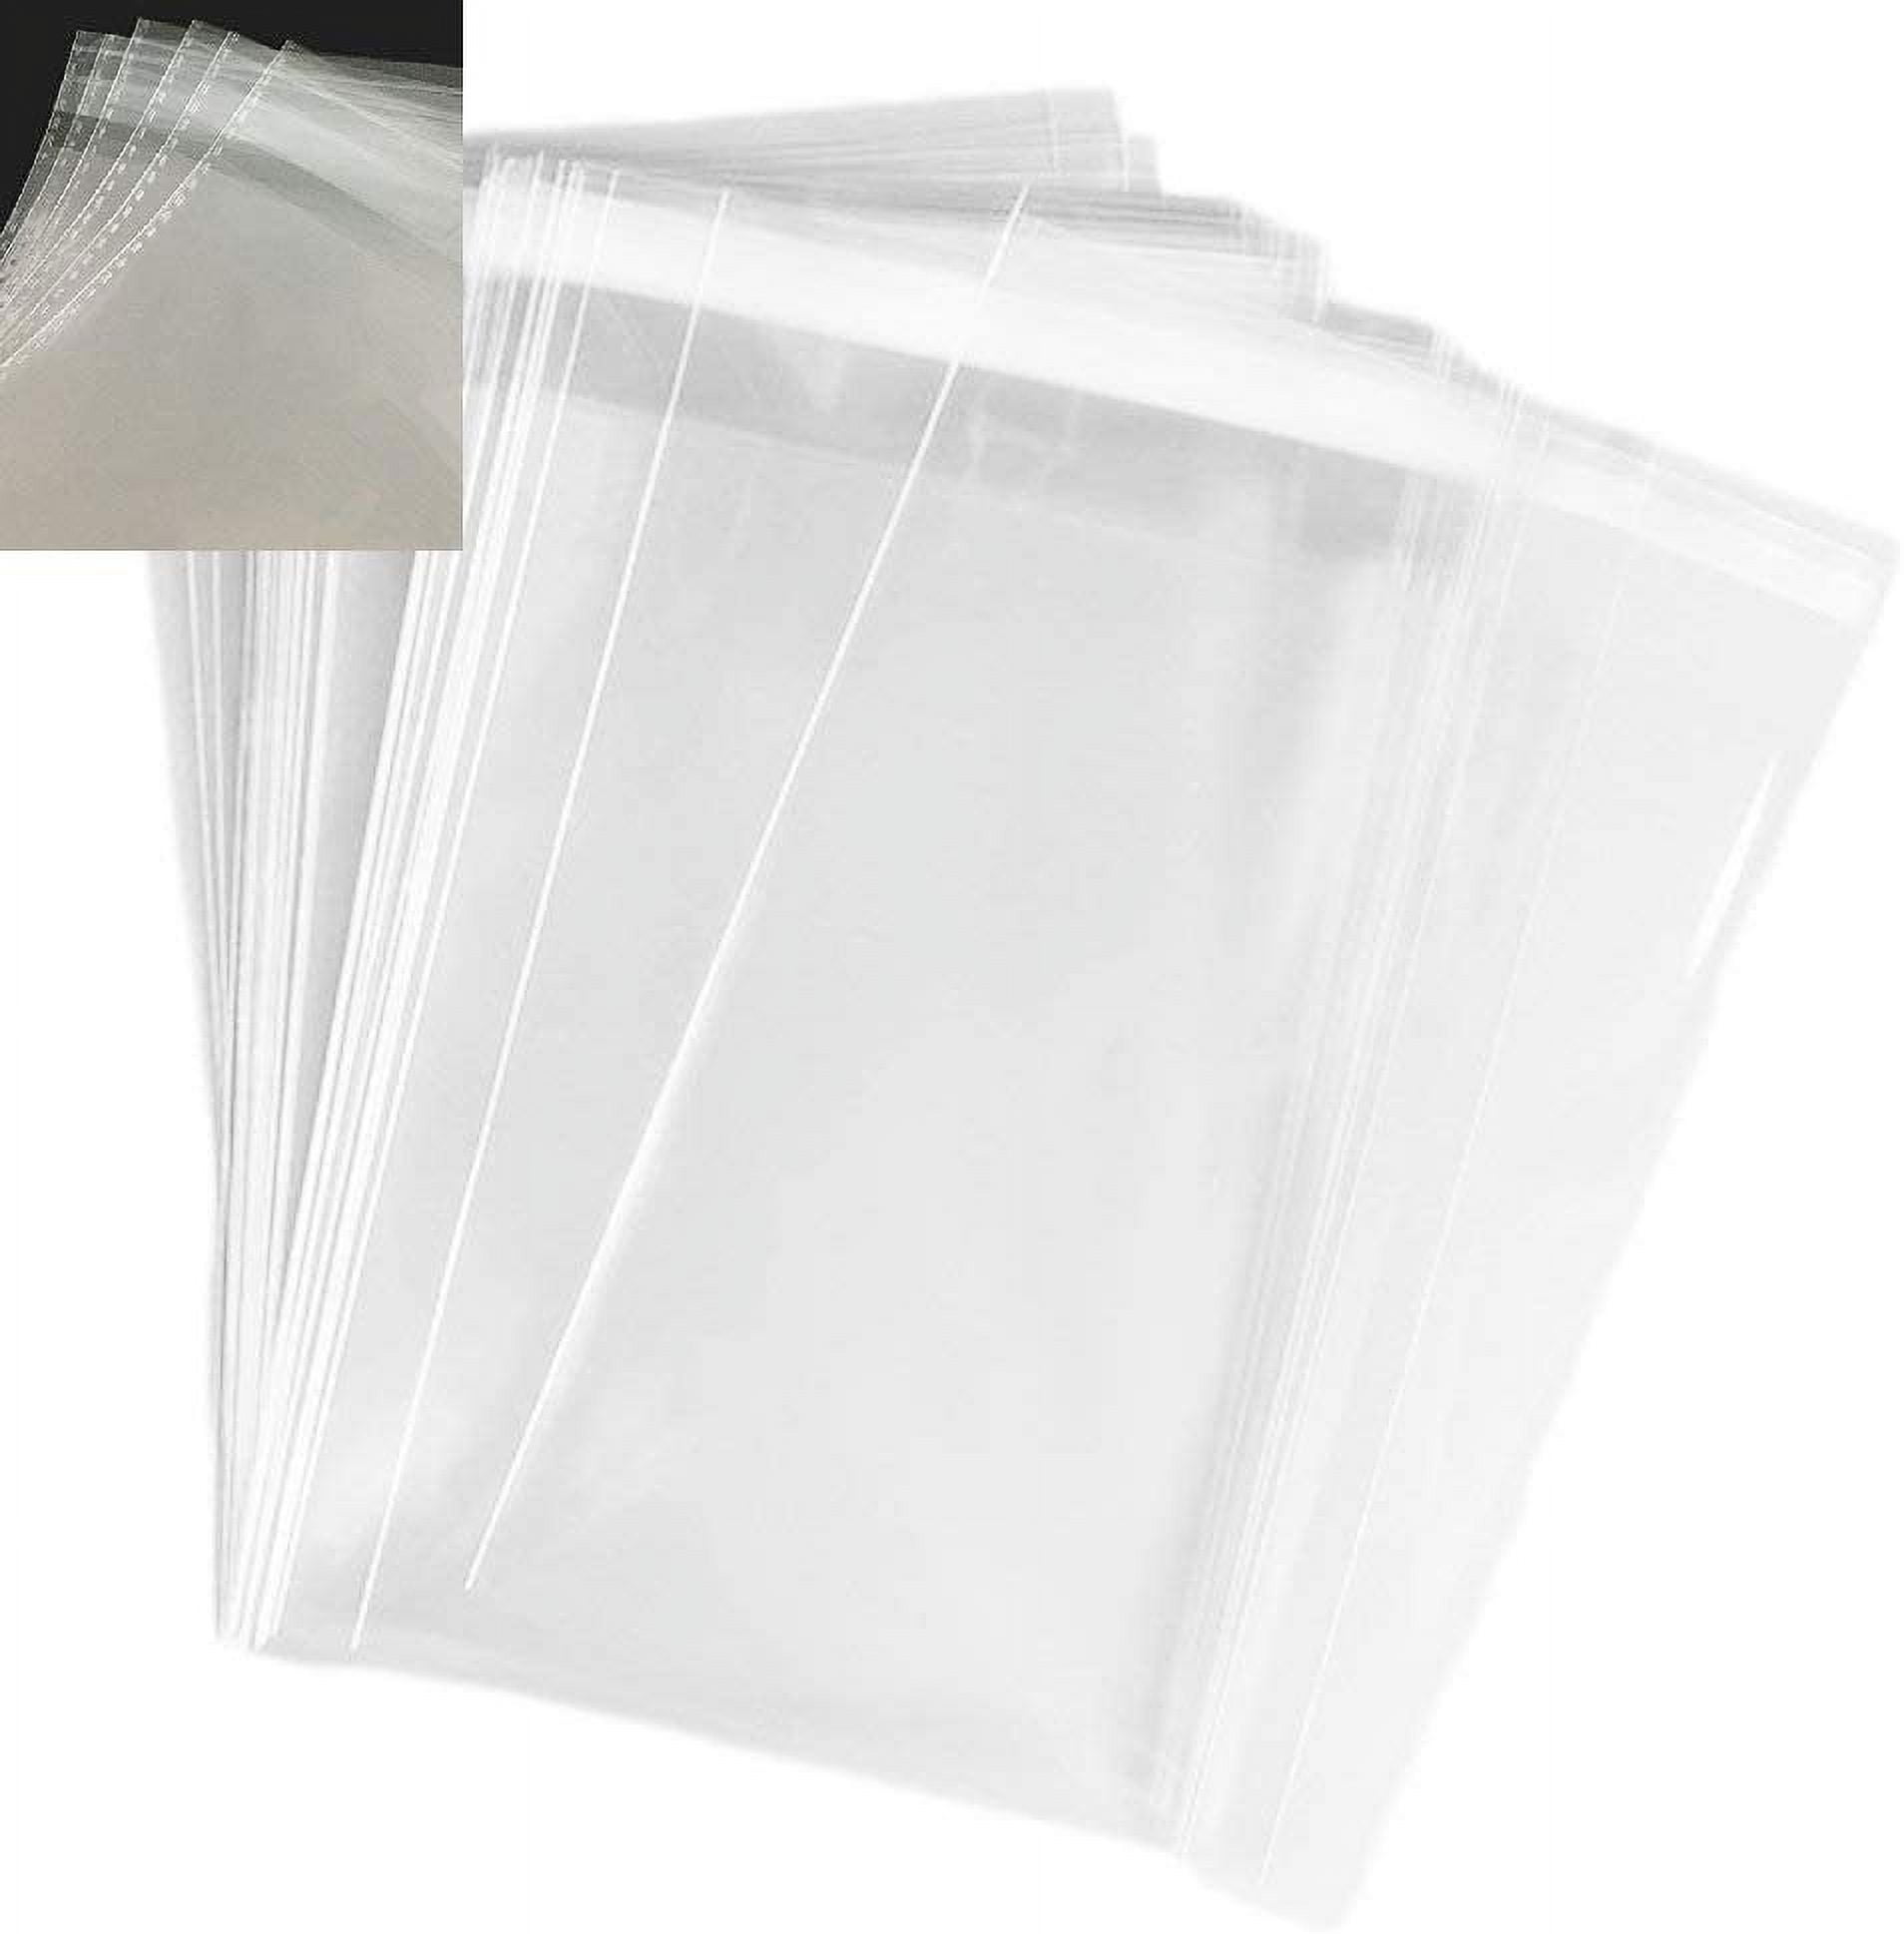  FOMIYES 100pcs Soap Storage Bags for Dirtproof Business  Packing Self-adhesive Bag Dirtproof Business Packaging Storage Packing Bag  Multi-use Storage Bags Craft Bags Craft Pack Gift Plastic : Beauty &  Personal